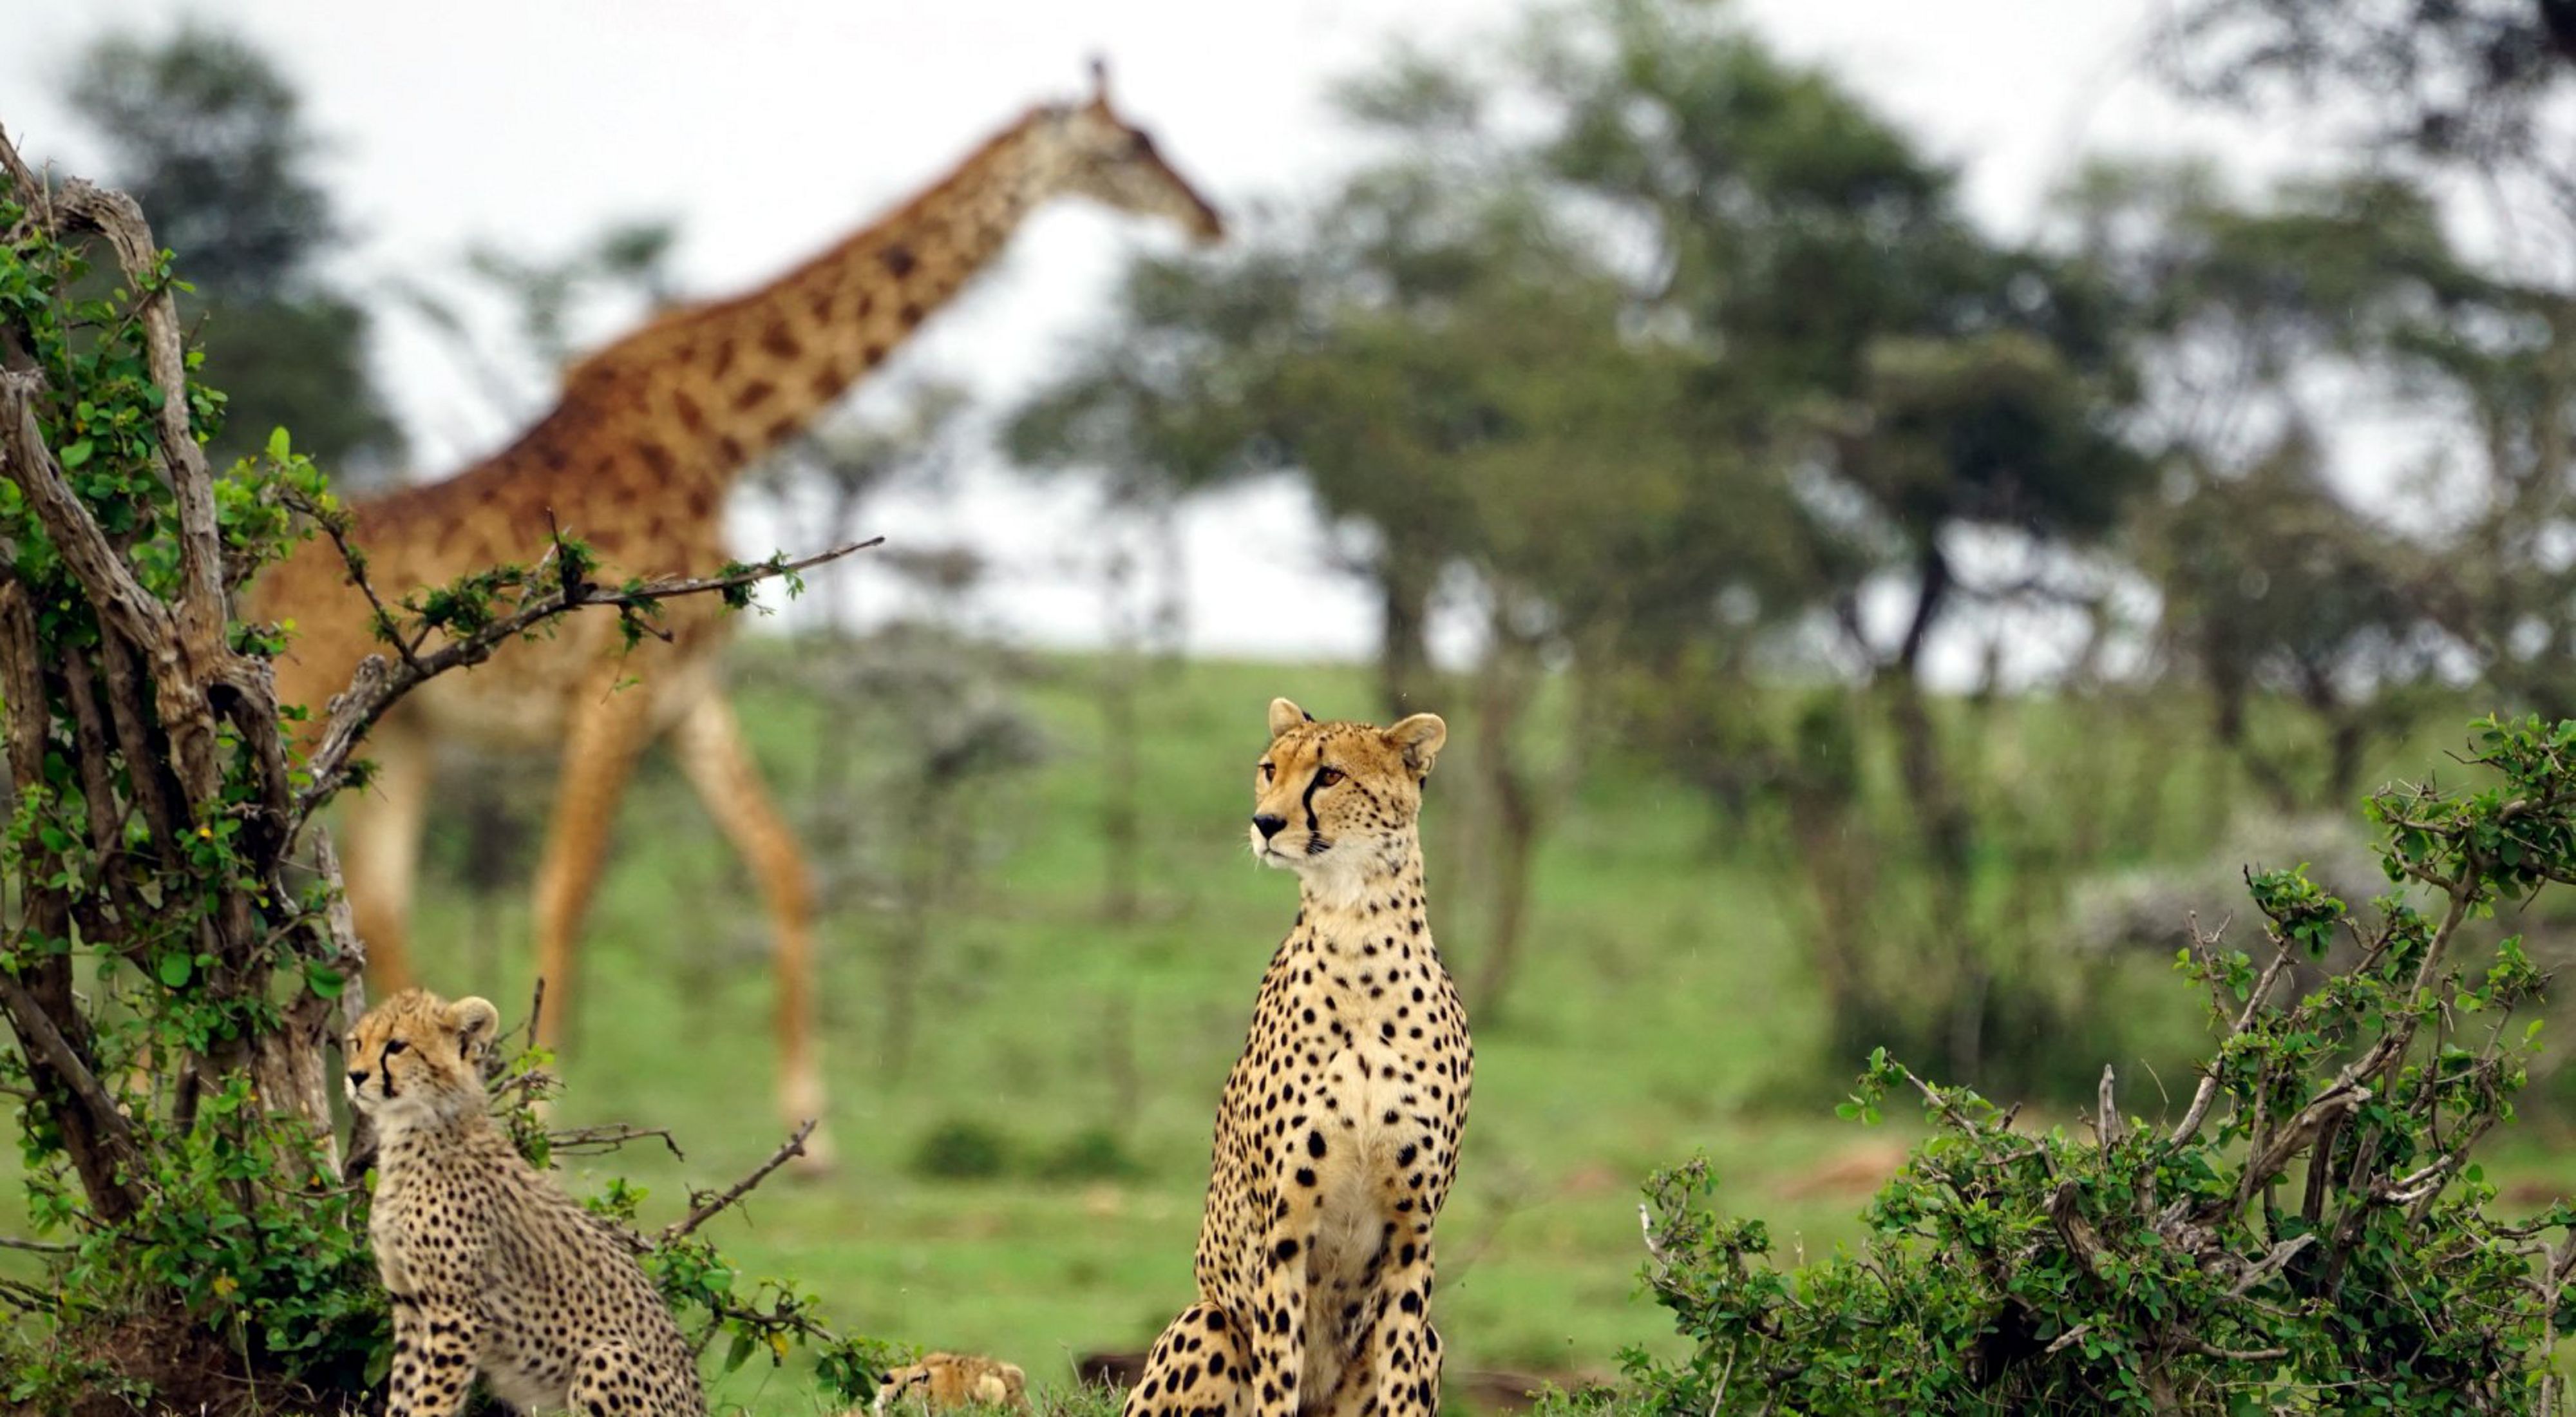 A cheetah and her cubs in Kenya with a giraffe in the background